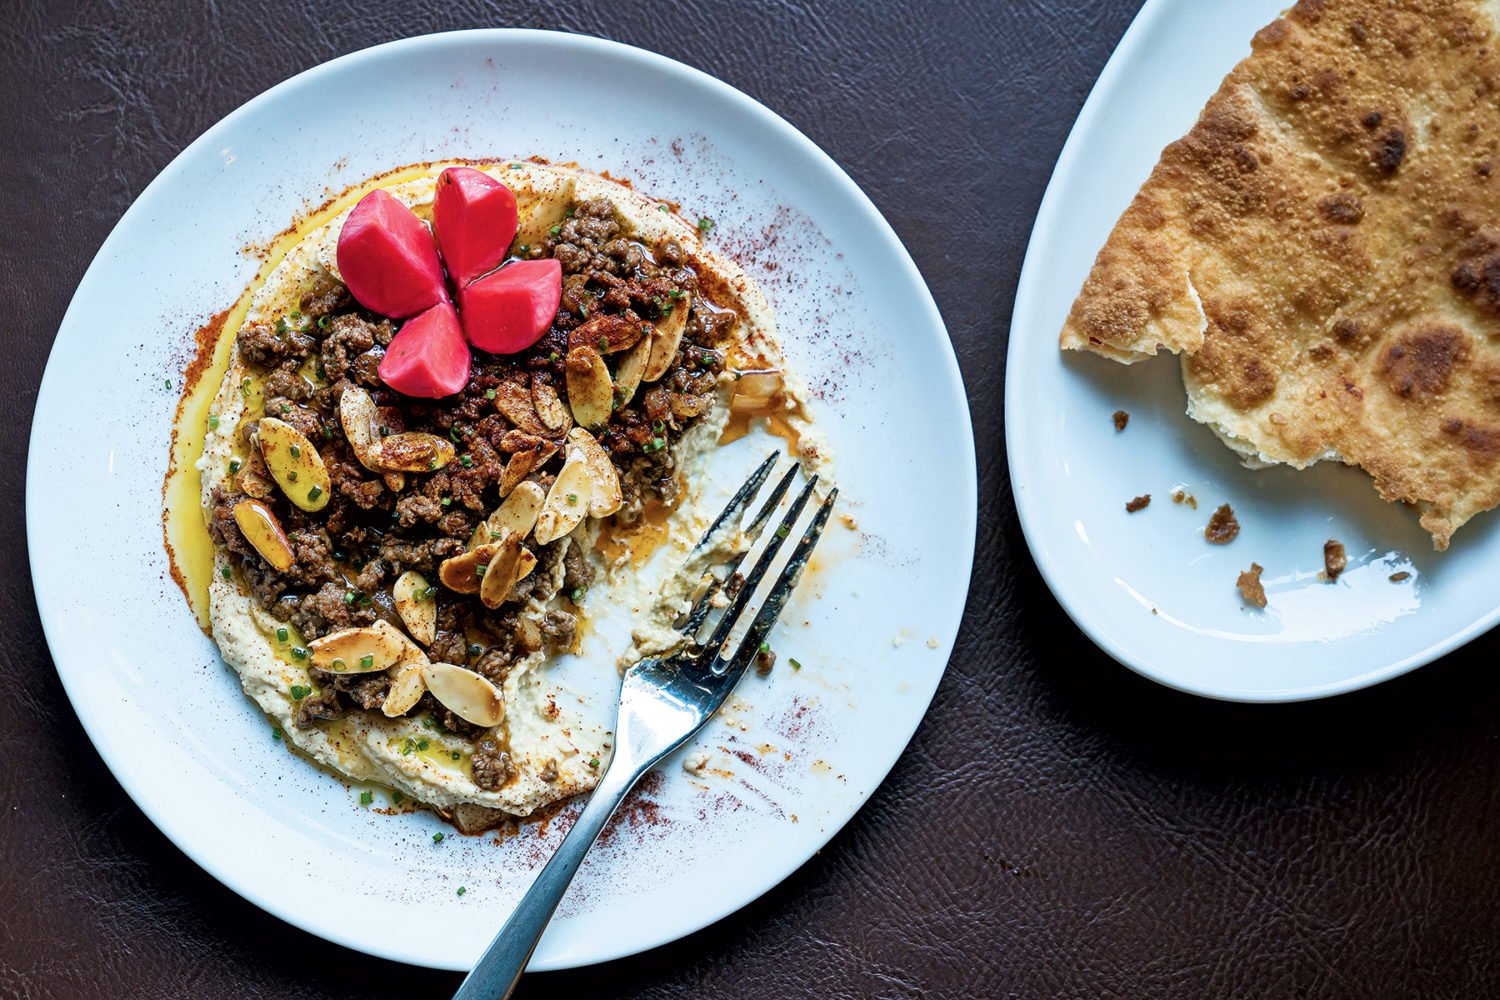 Hummus with sautéed beef and snowshoe naan at the eclectic new Chloe. Photograph by Scott Suchman.